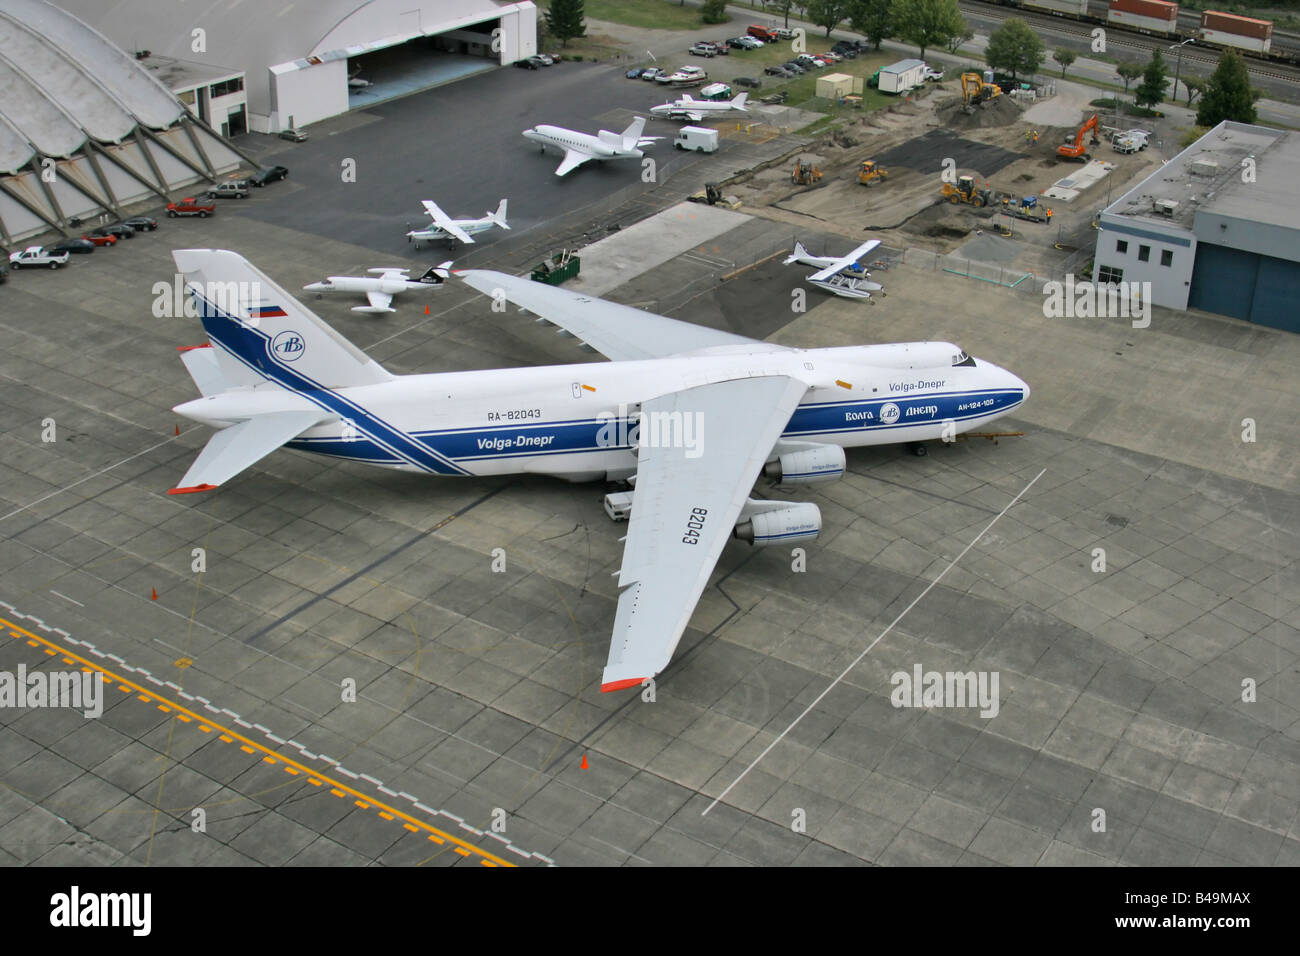 Volga Dnepr cargo) King County Airport Seattle WA USA Banque D'Images